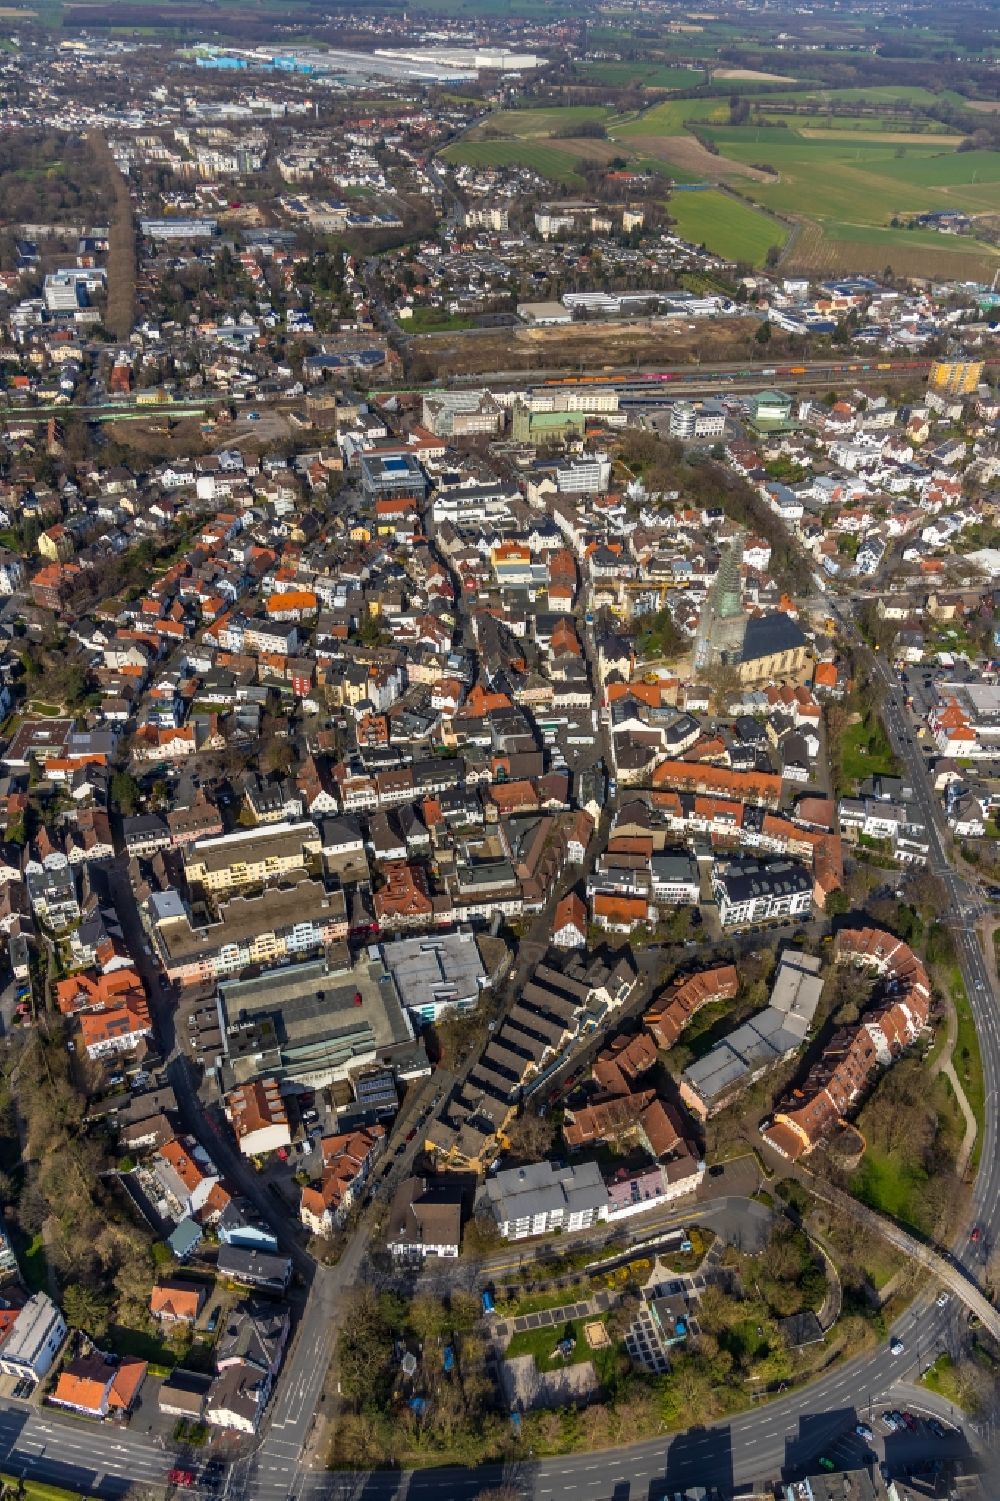 Unna from the bird's eye view: The city center in the downtown area in Unna in the state North Rhine-Westphalia, Germany